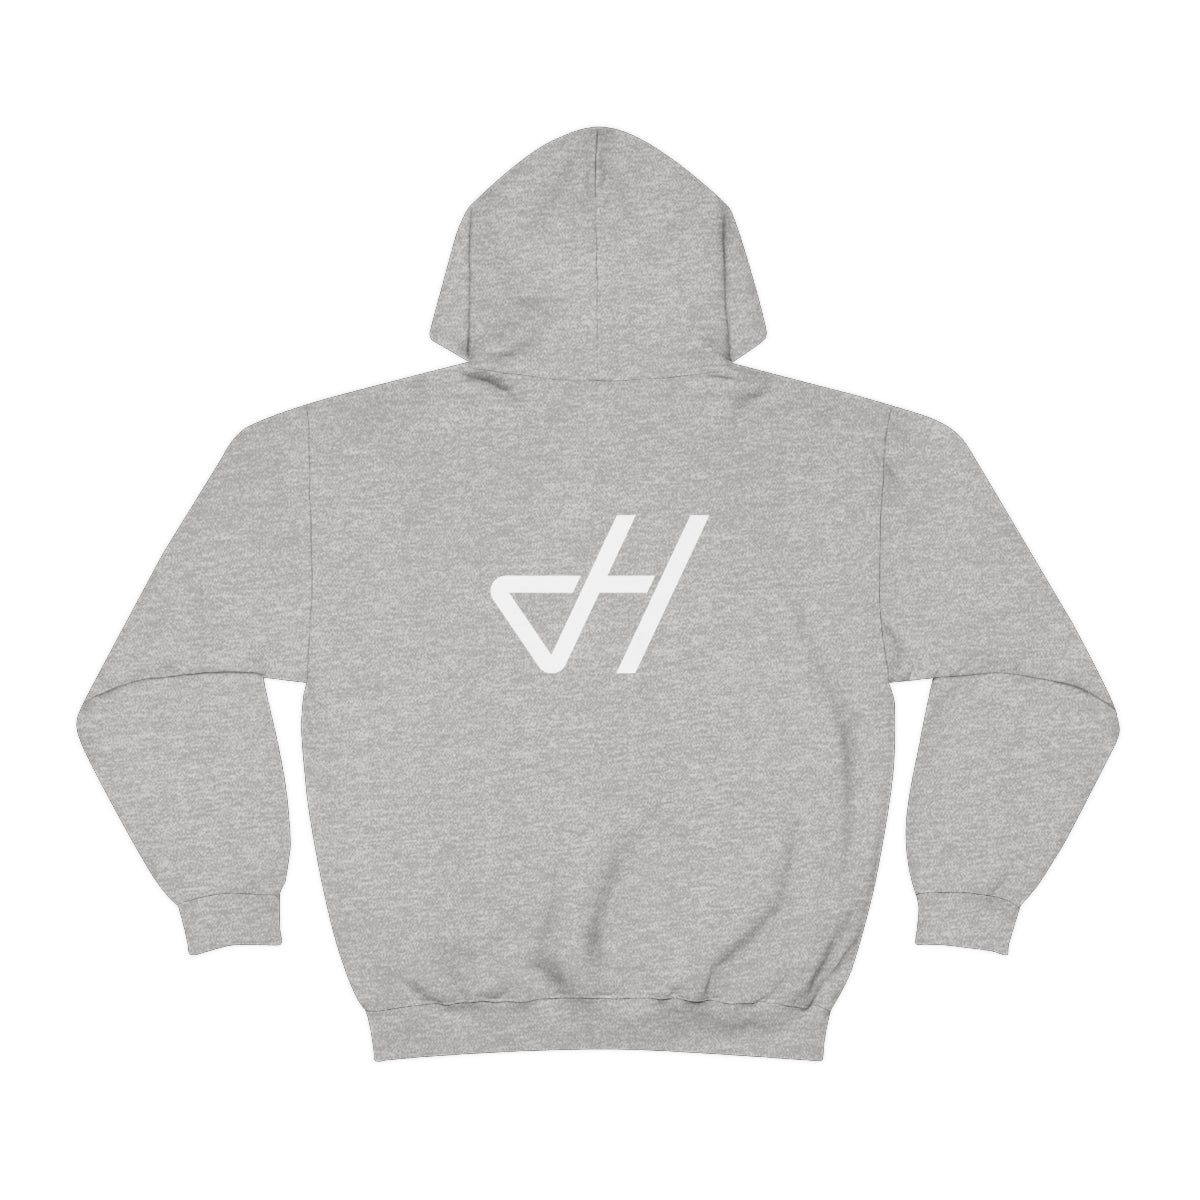 Dontae Horne "DH" Double Sided Hoodie